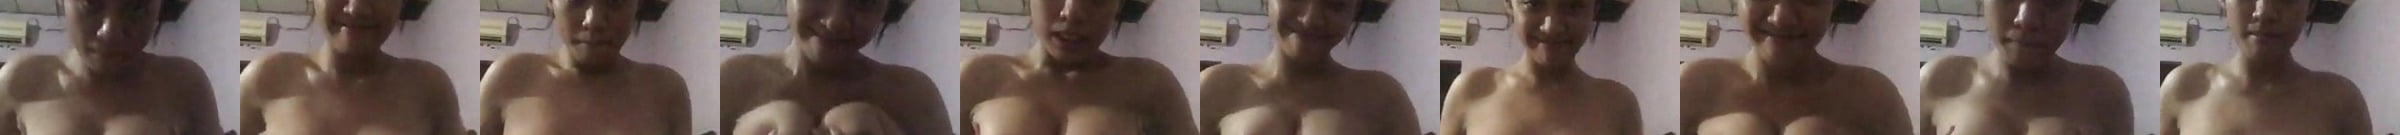 Newest Malay Porn Videos 3 Xhamster